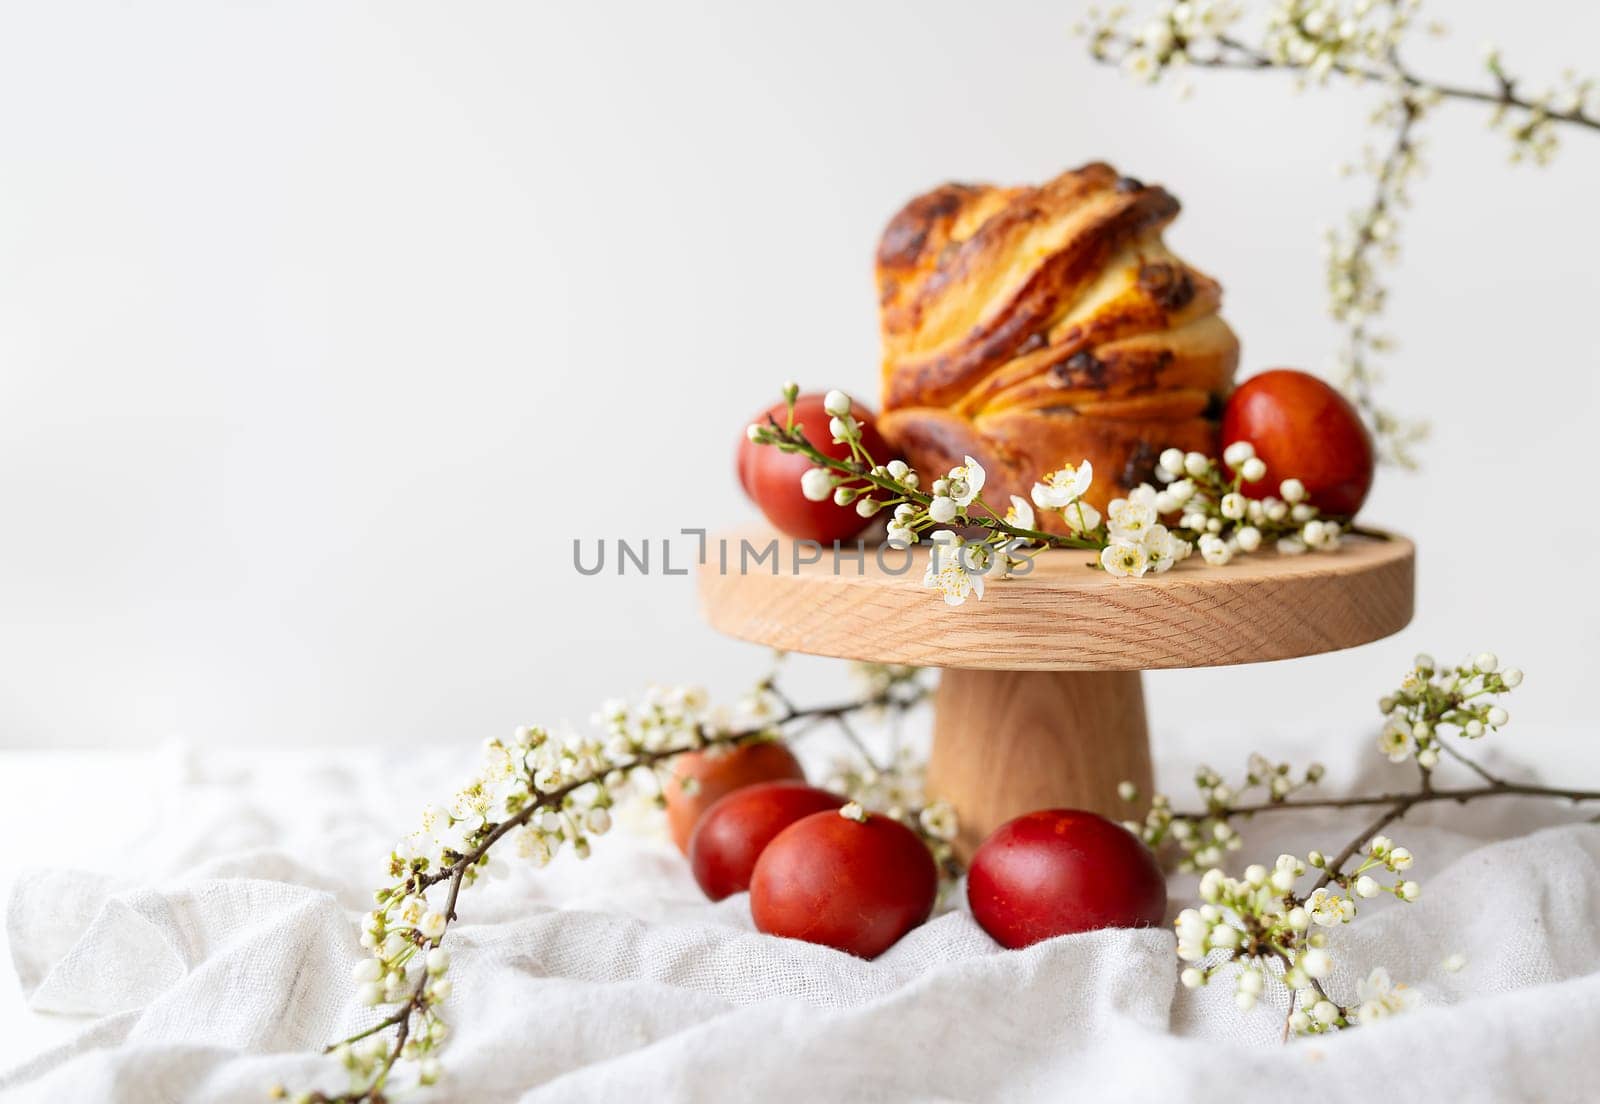 Festive table setting, Easter pastries on a wooden stand and cherry blossoms. Easter holiday concept